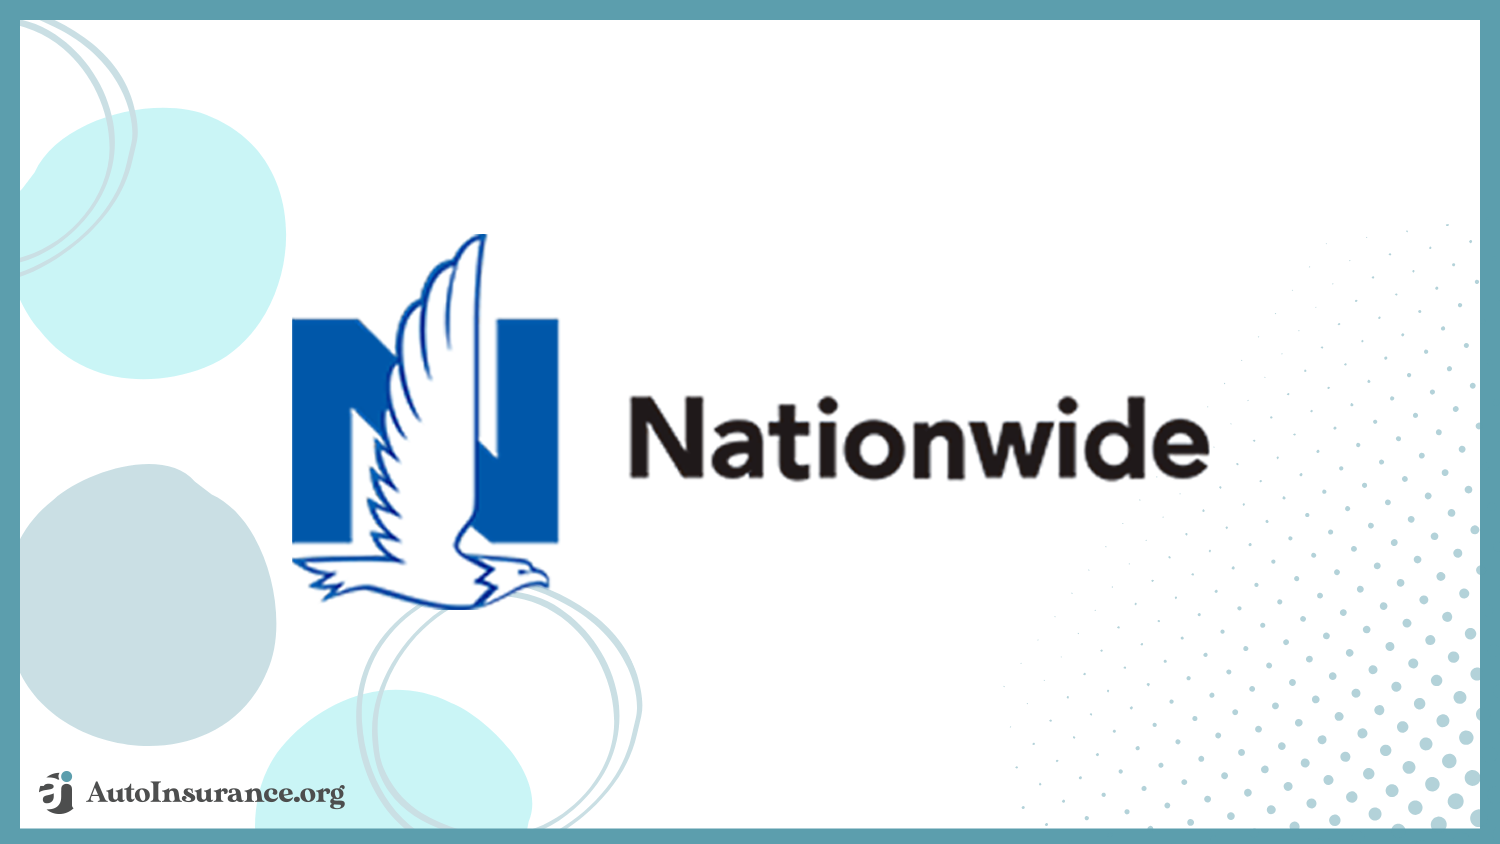 Nationwide: Best Auto Insurance for Single Adults